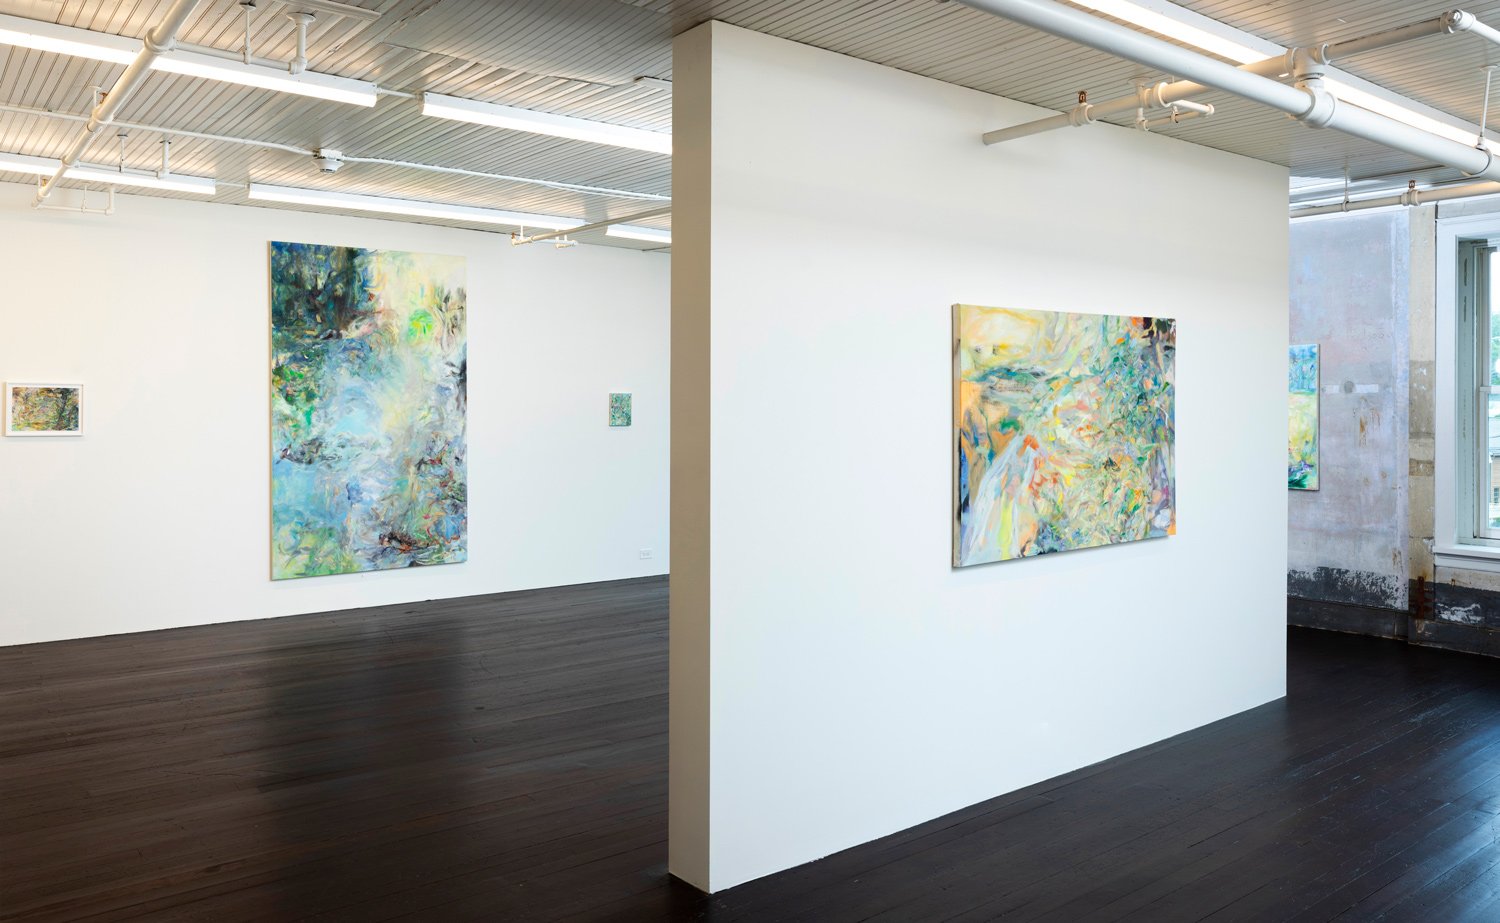 Installation view, solo show "Ambrosia" at SEPTEMBER Gallery